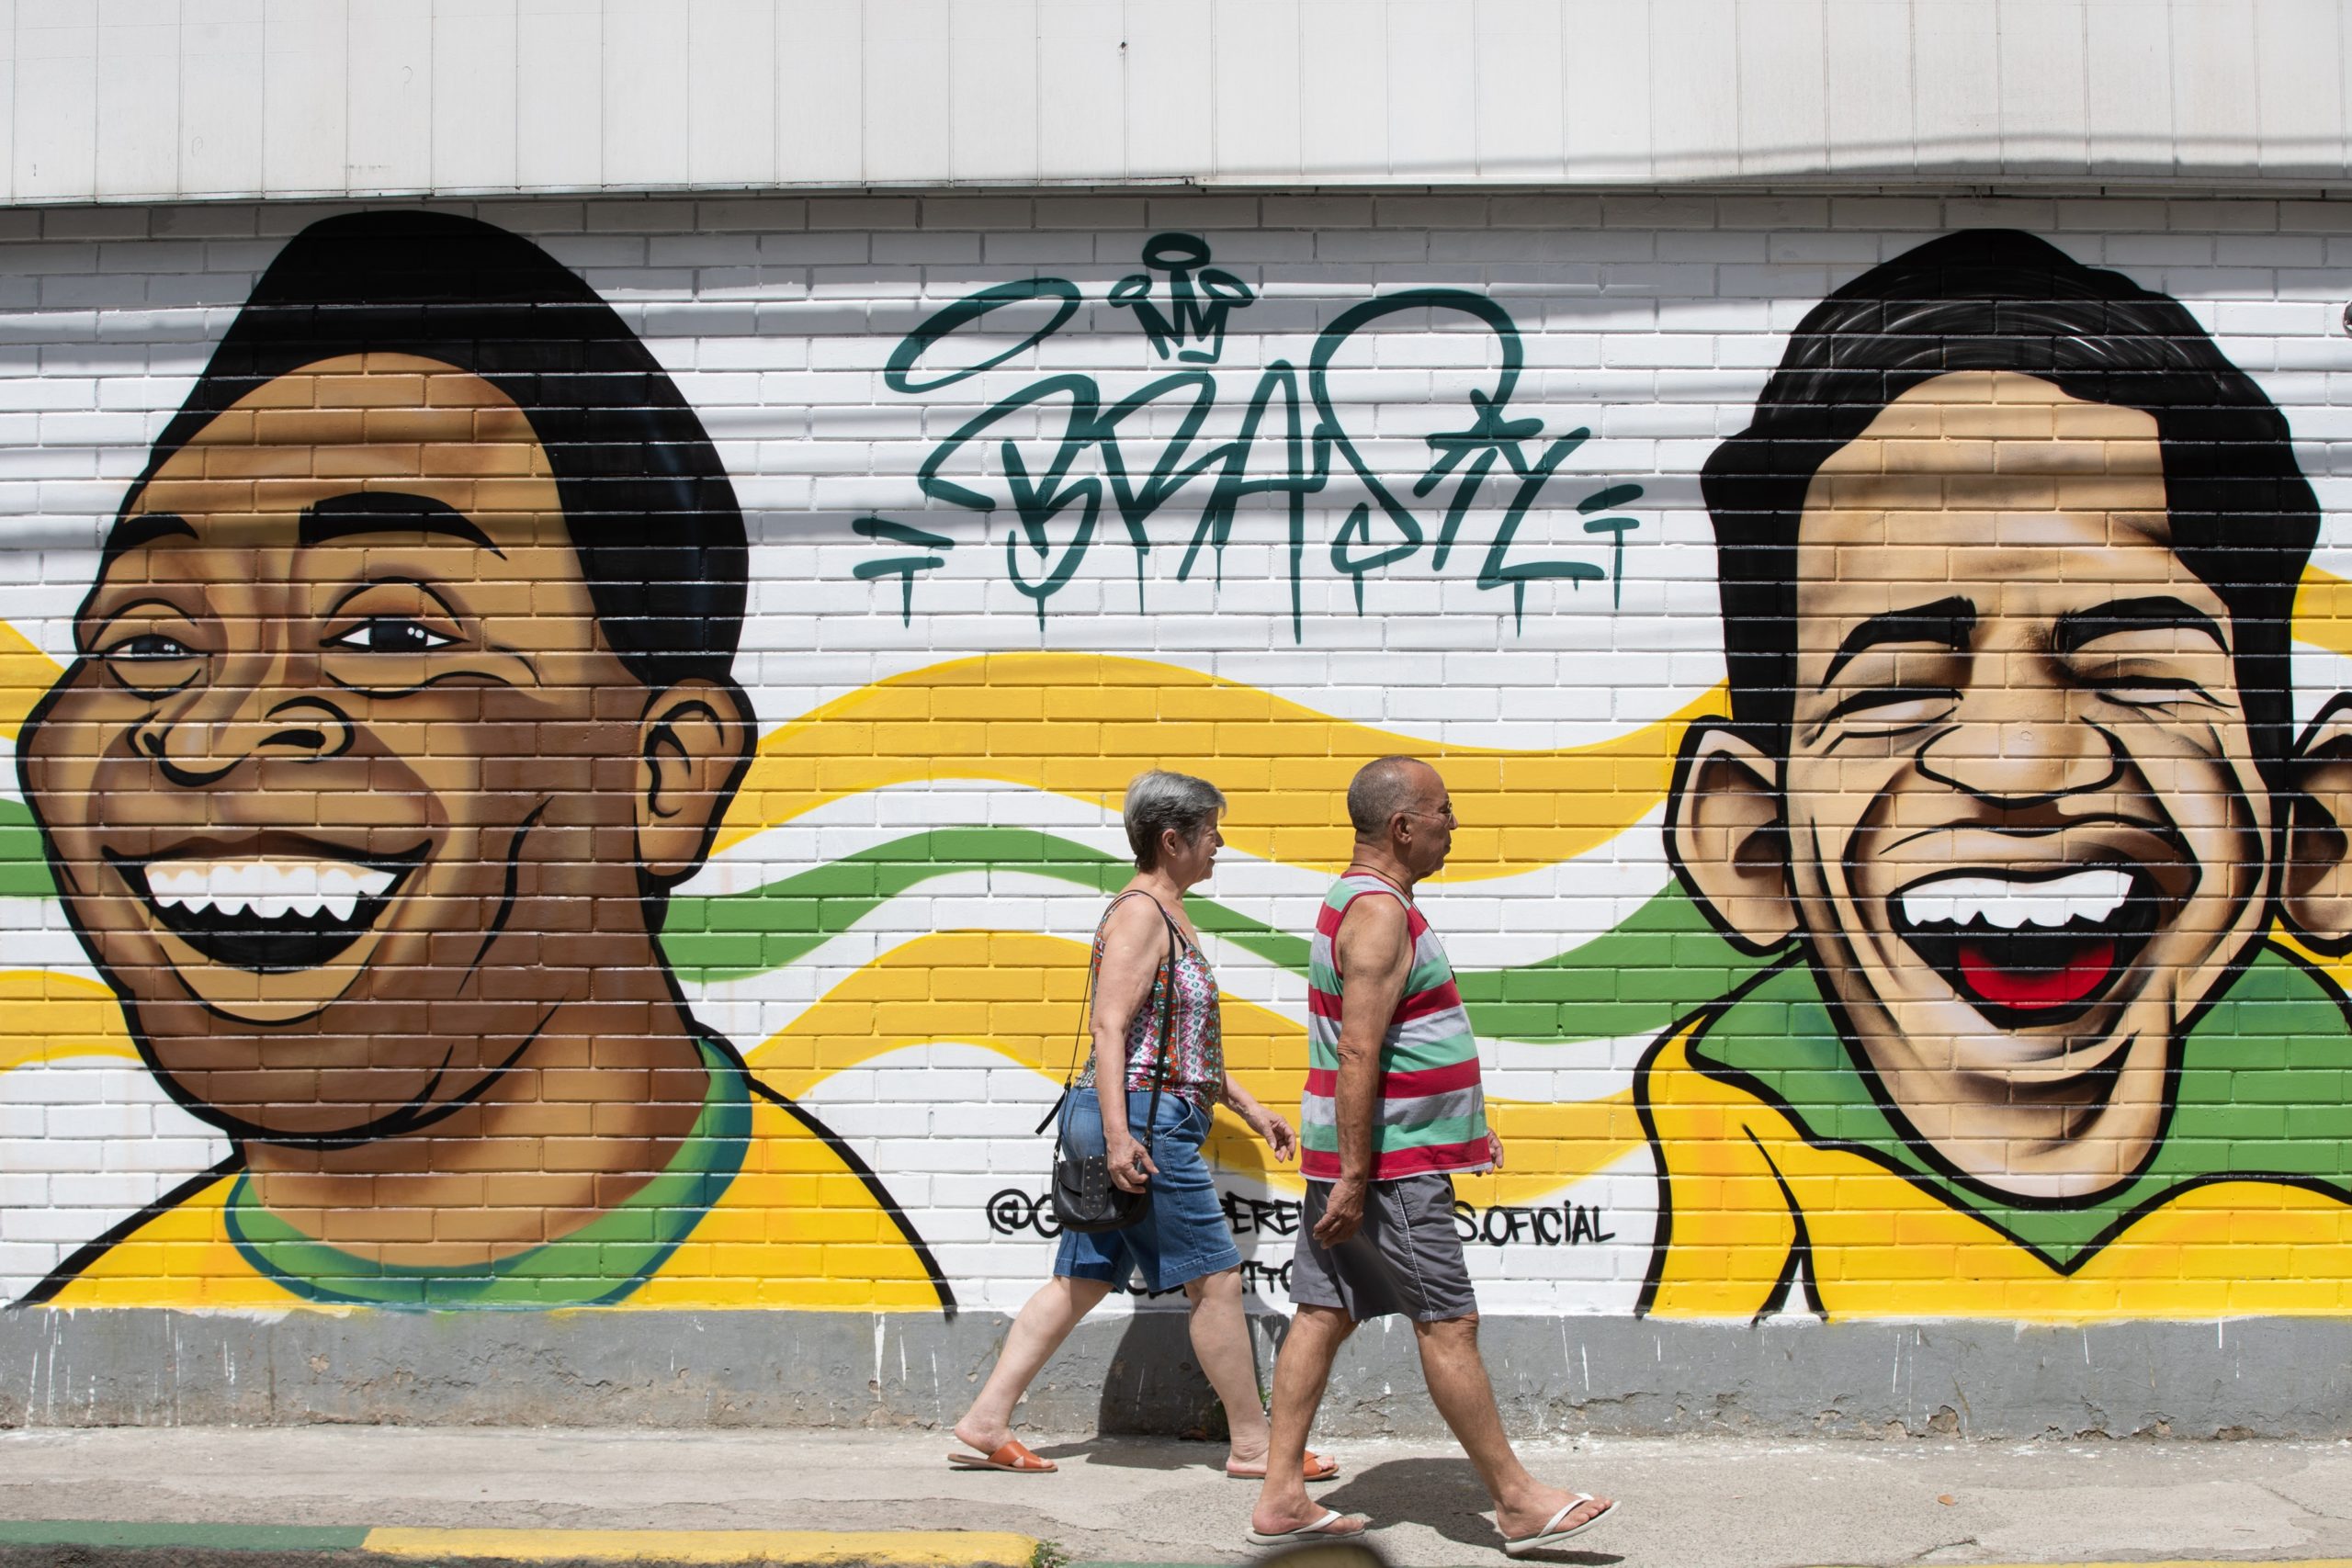 Brazilians decorate the streets for the FIFA World Cup in Qatar